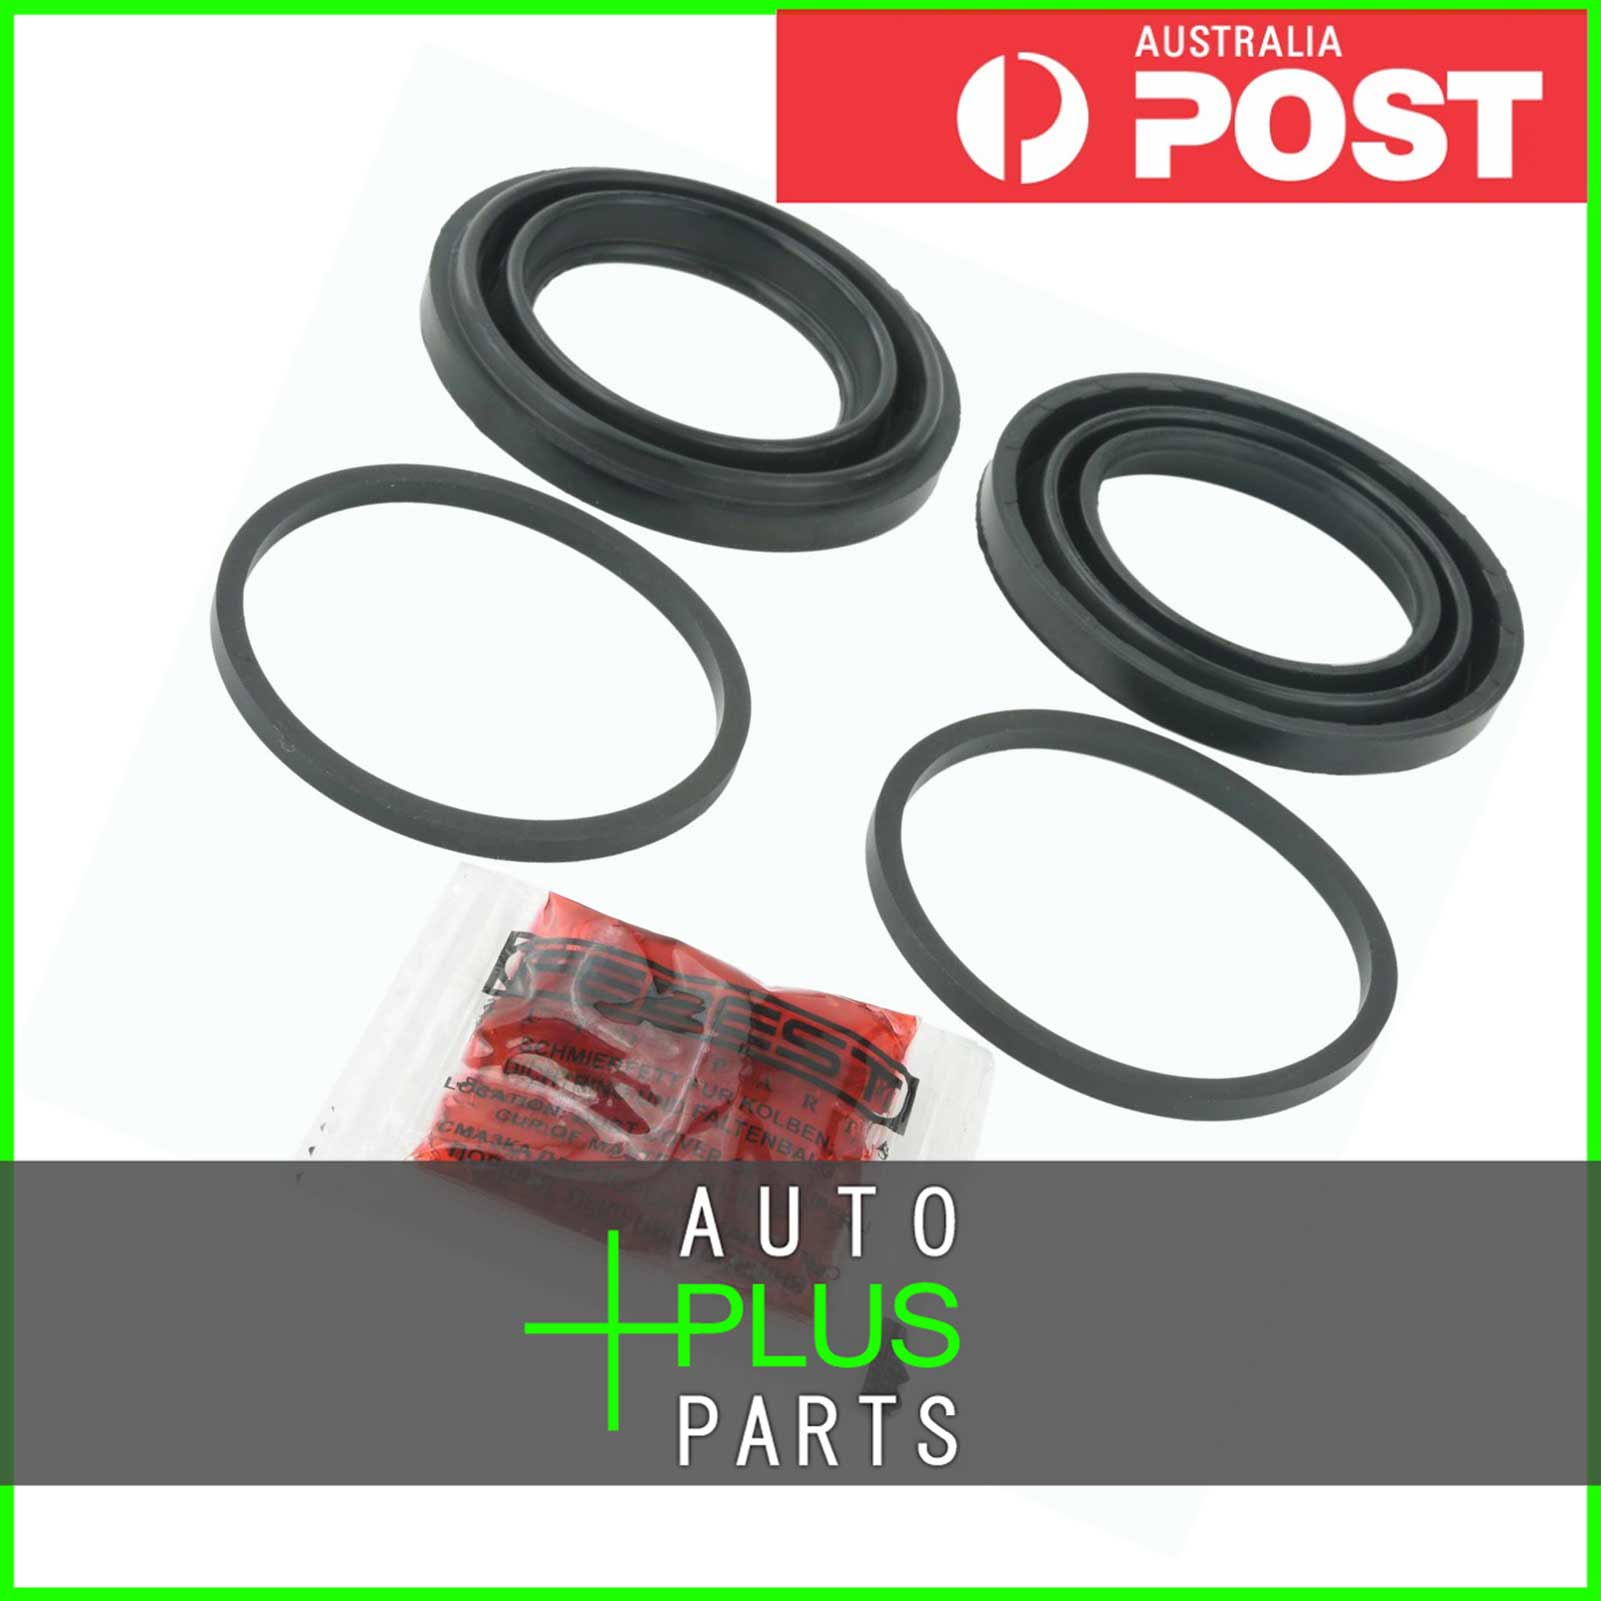 Fits CHEVROLET AVALANCHE 1500 FRONT BRAKE CALIPER REPAIR KIT - (2WD),(4WD) Product Photo